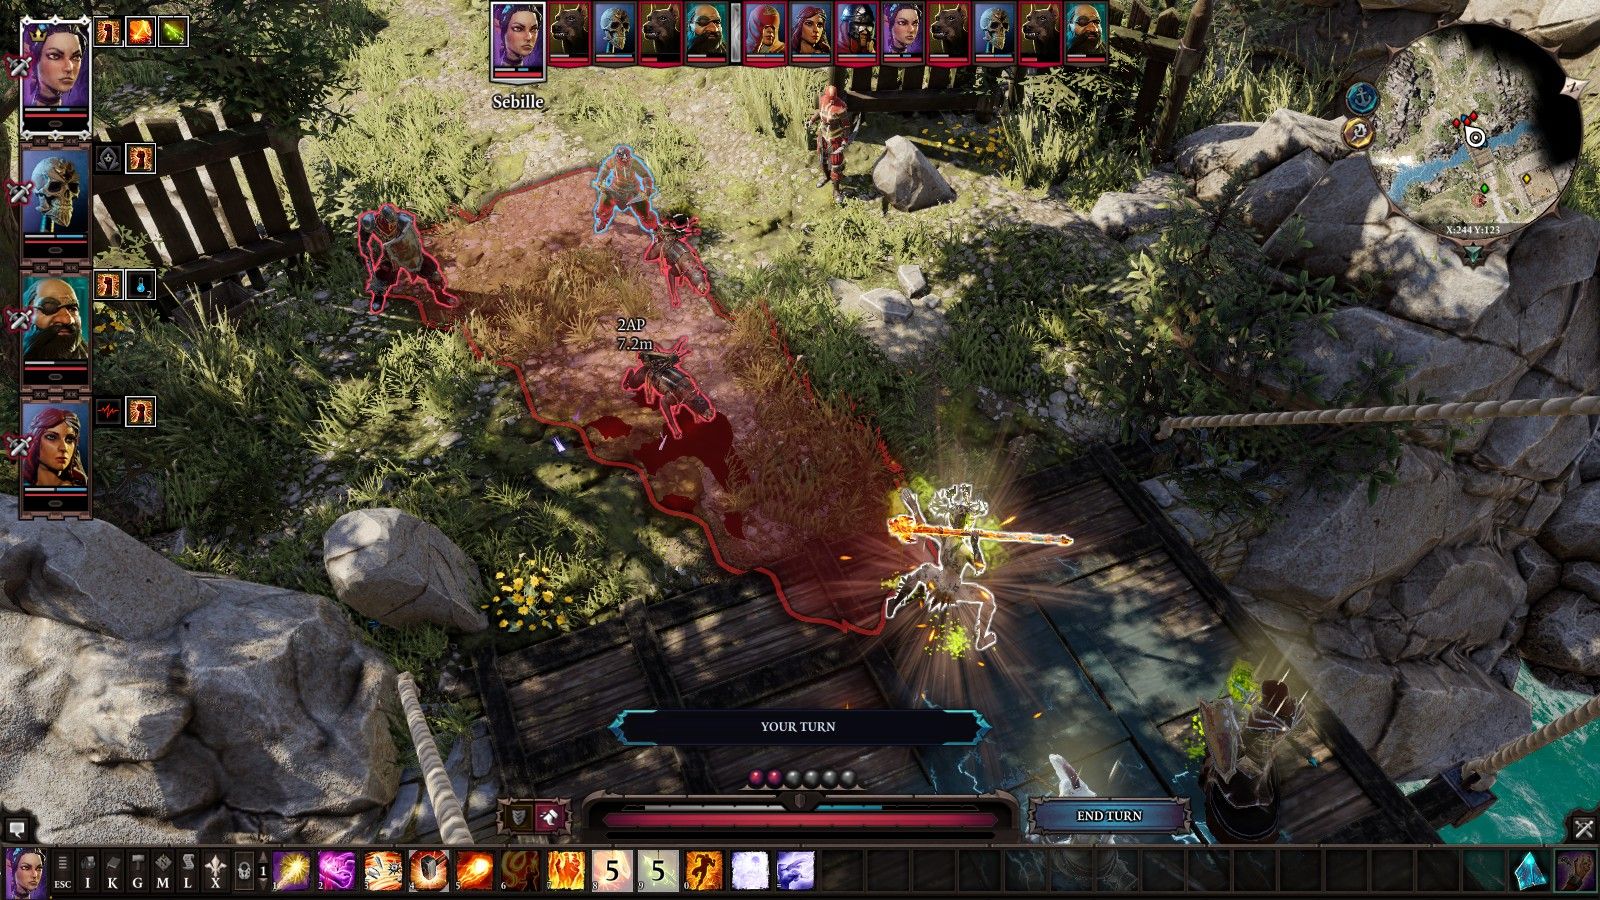 Sebille uses Battle Stomp with a staff in Divinity Original Sin 2